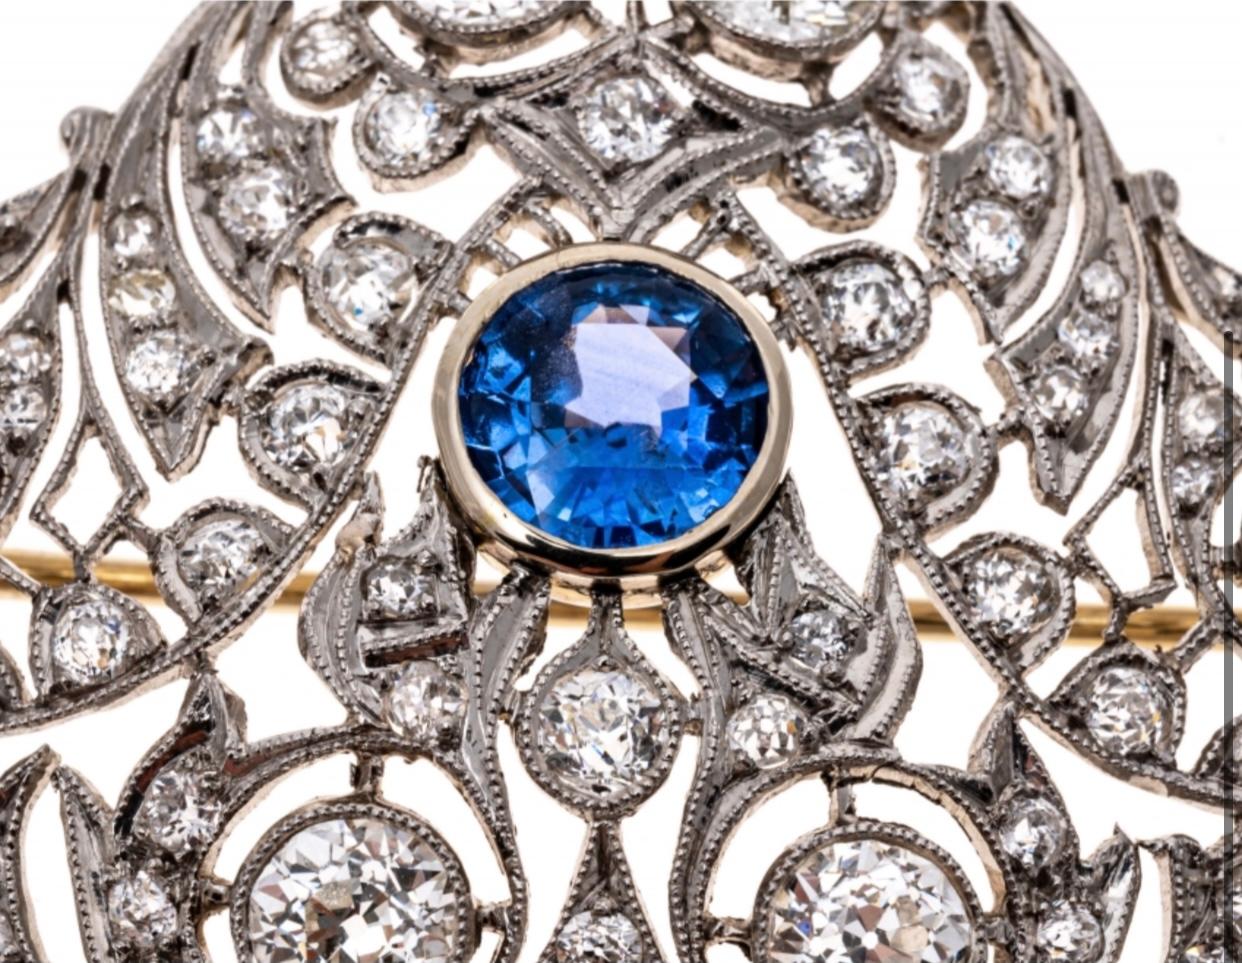 Women's Antique Edwardian Platinum, Diamond and Sapphire Brooch/Pendant, GIA Certified For Sale